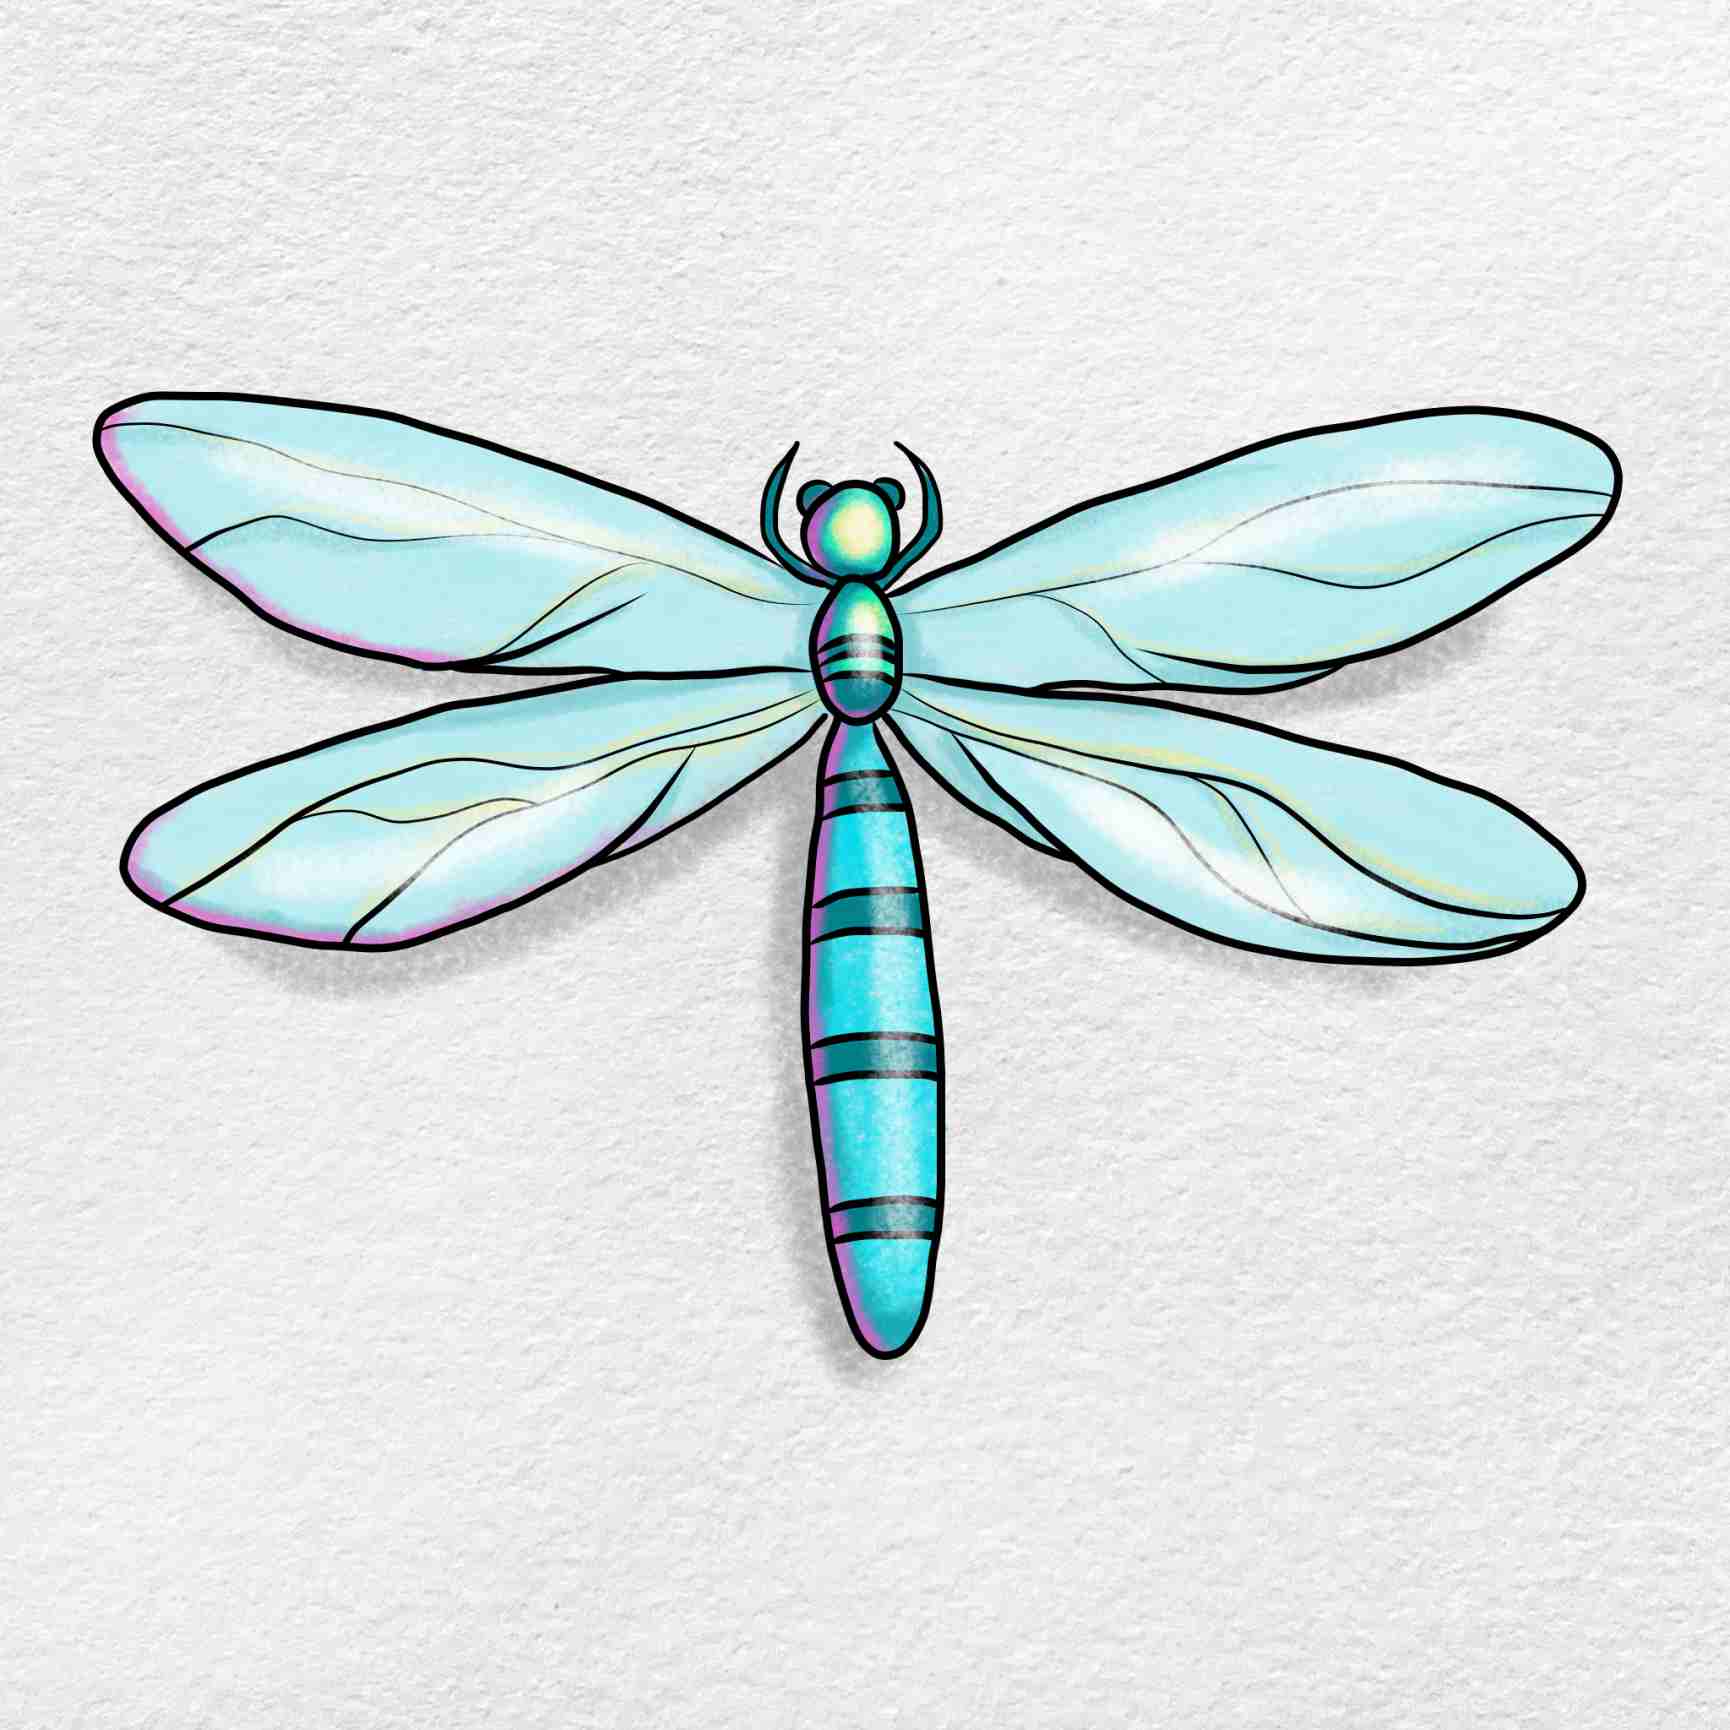 Top 104+ Wallpaper Pictures Of Dragonflies To Draw Full HD, 2k, 4k 12/2023